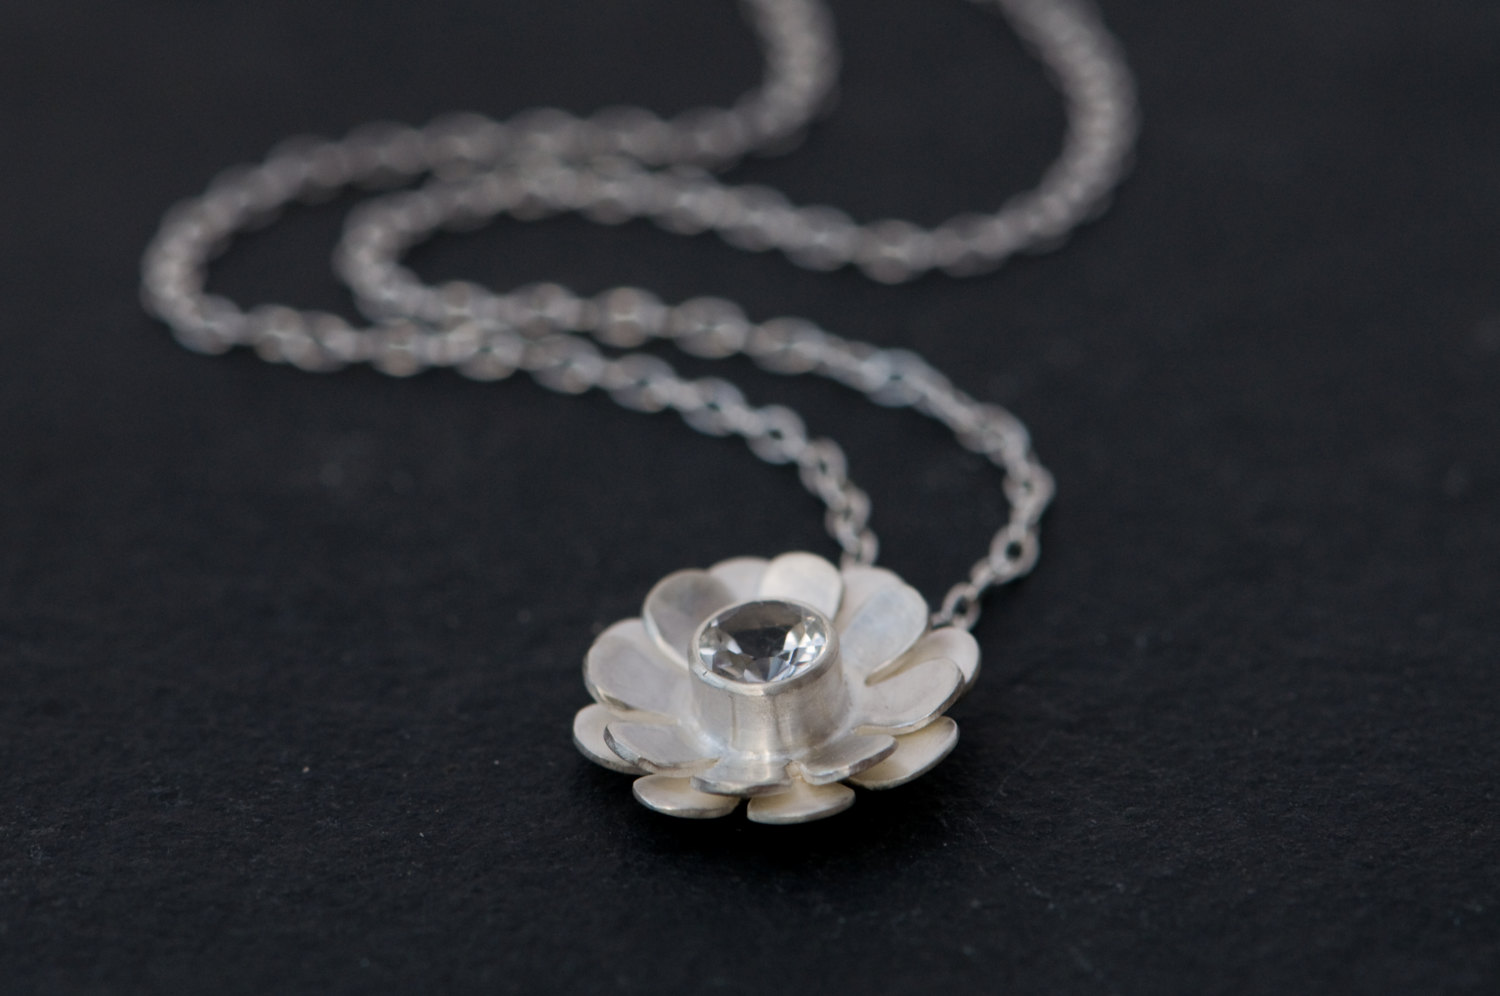 Pretty White Topaz daisy design, set in satin finished sterling silver on a silver chain. Designed and handmade by William White in Cornwall, UK.